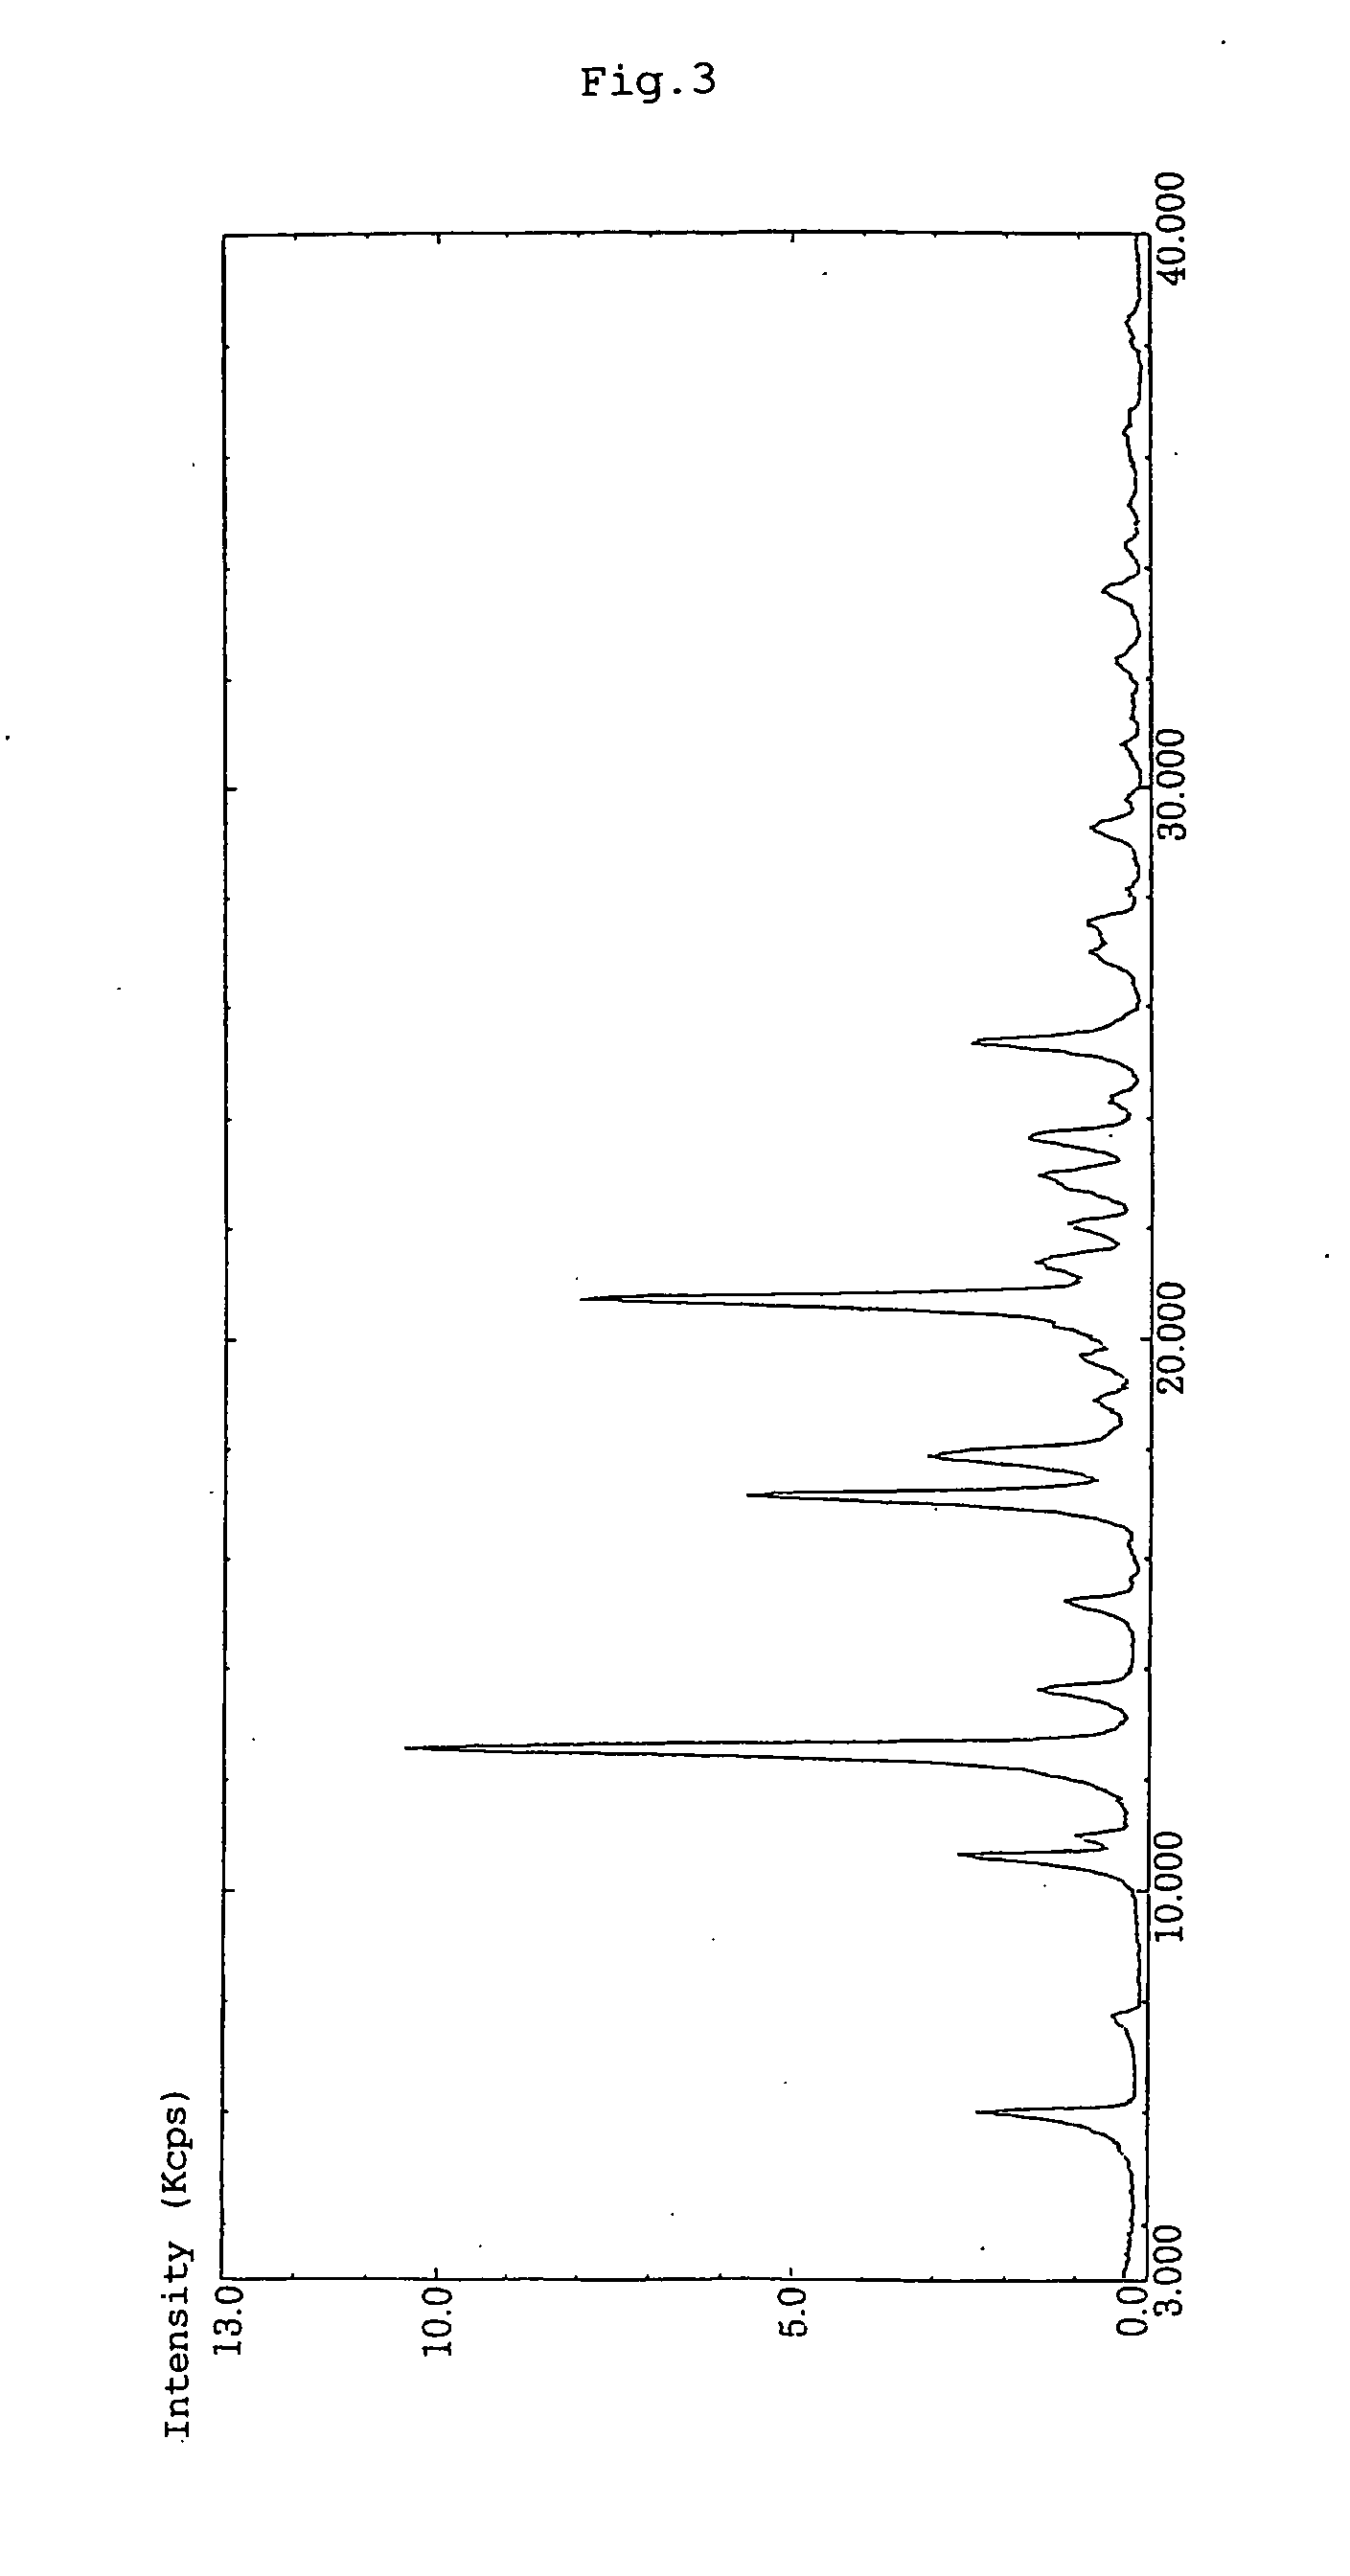 Crystal for oral solid drug and oral solid drug for dysuria treatment containing the same